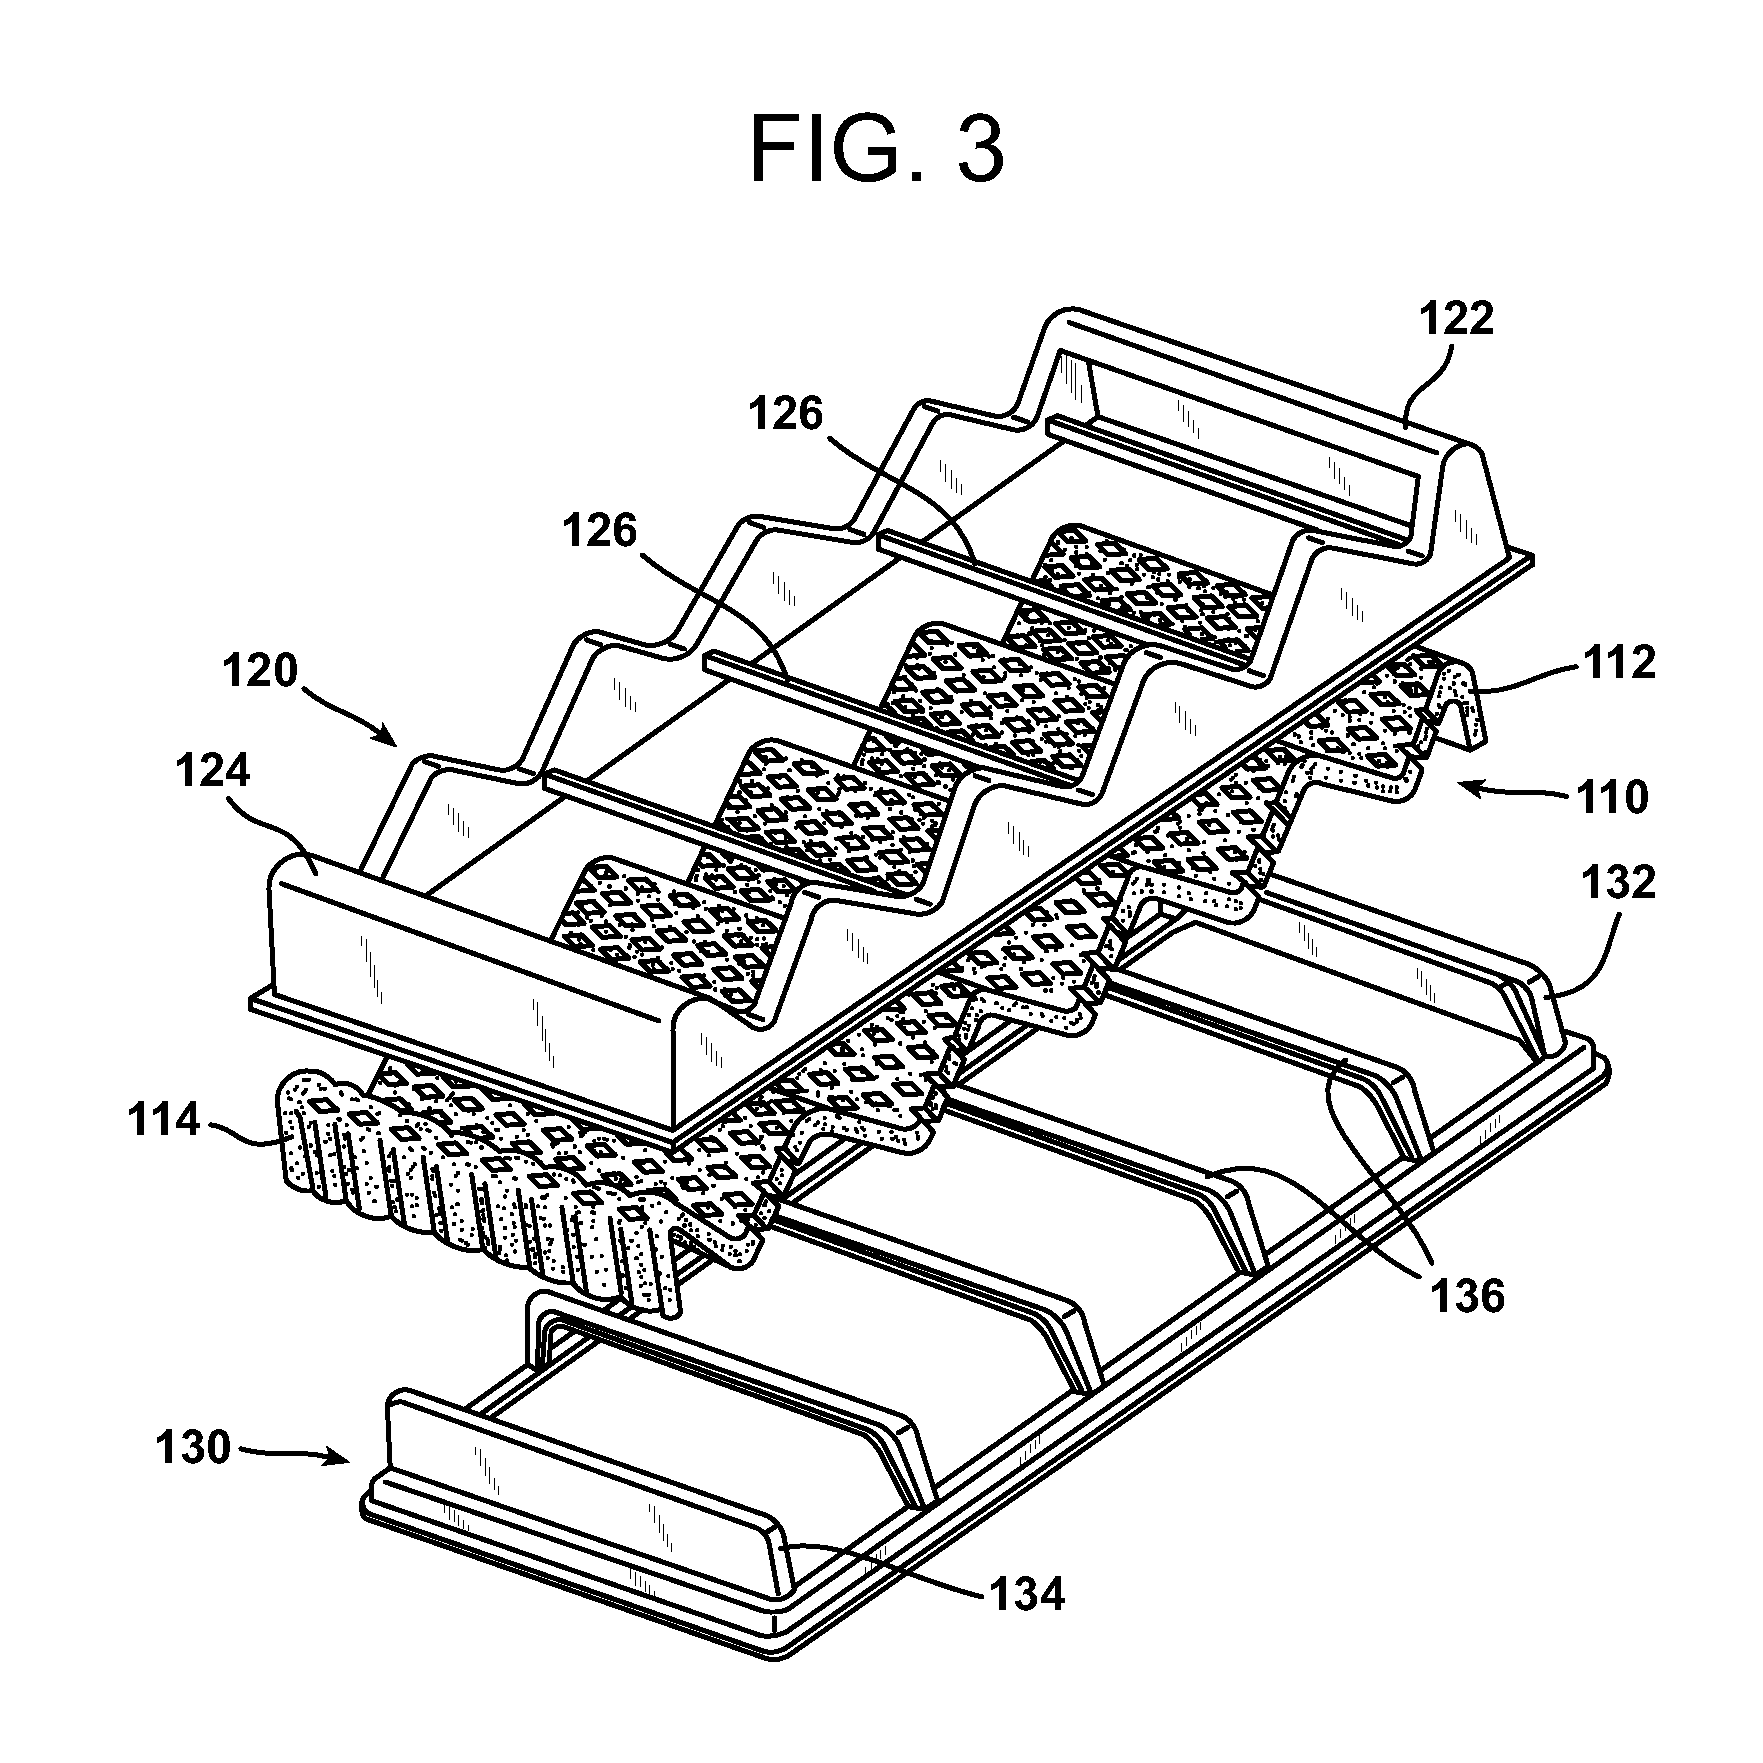 Air filter formed by slit and expanded layers of electrostatically enhanced material